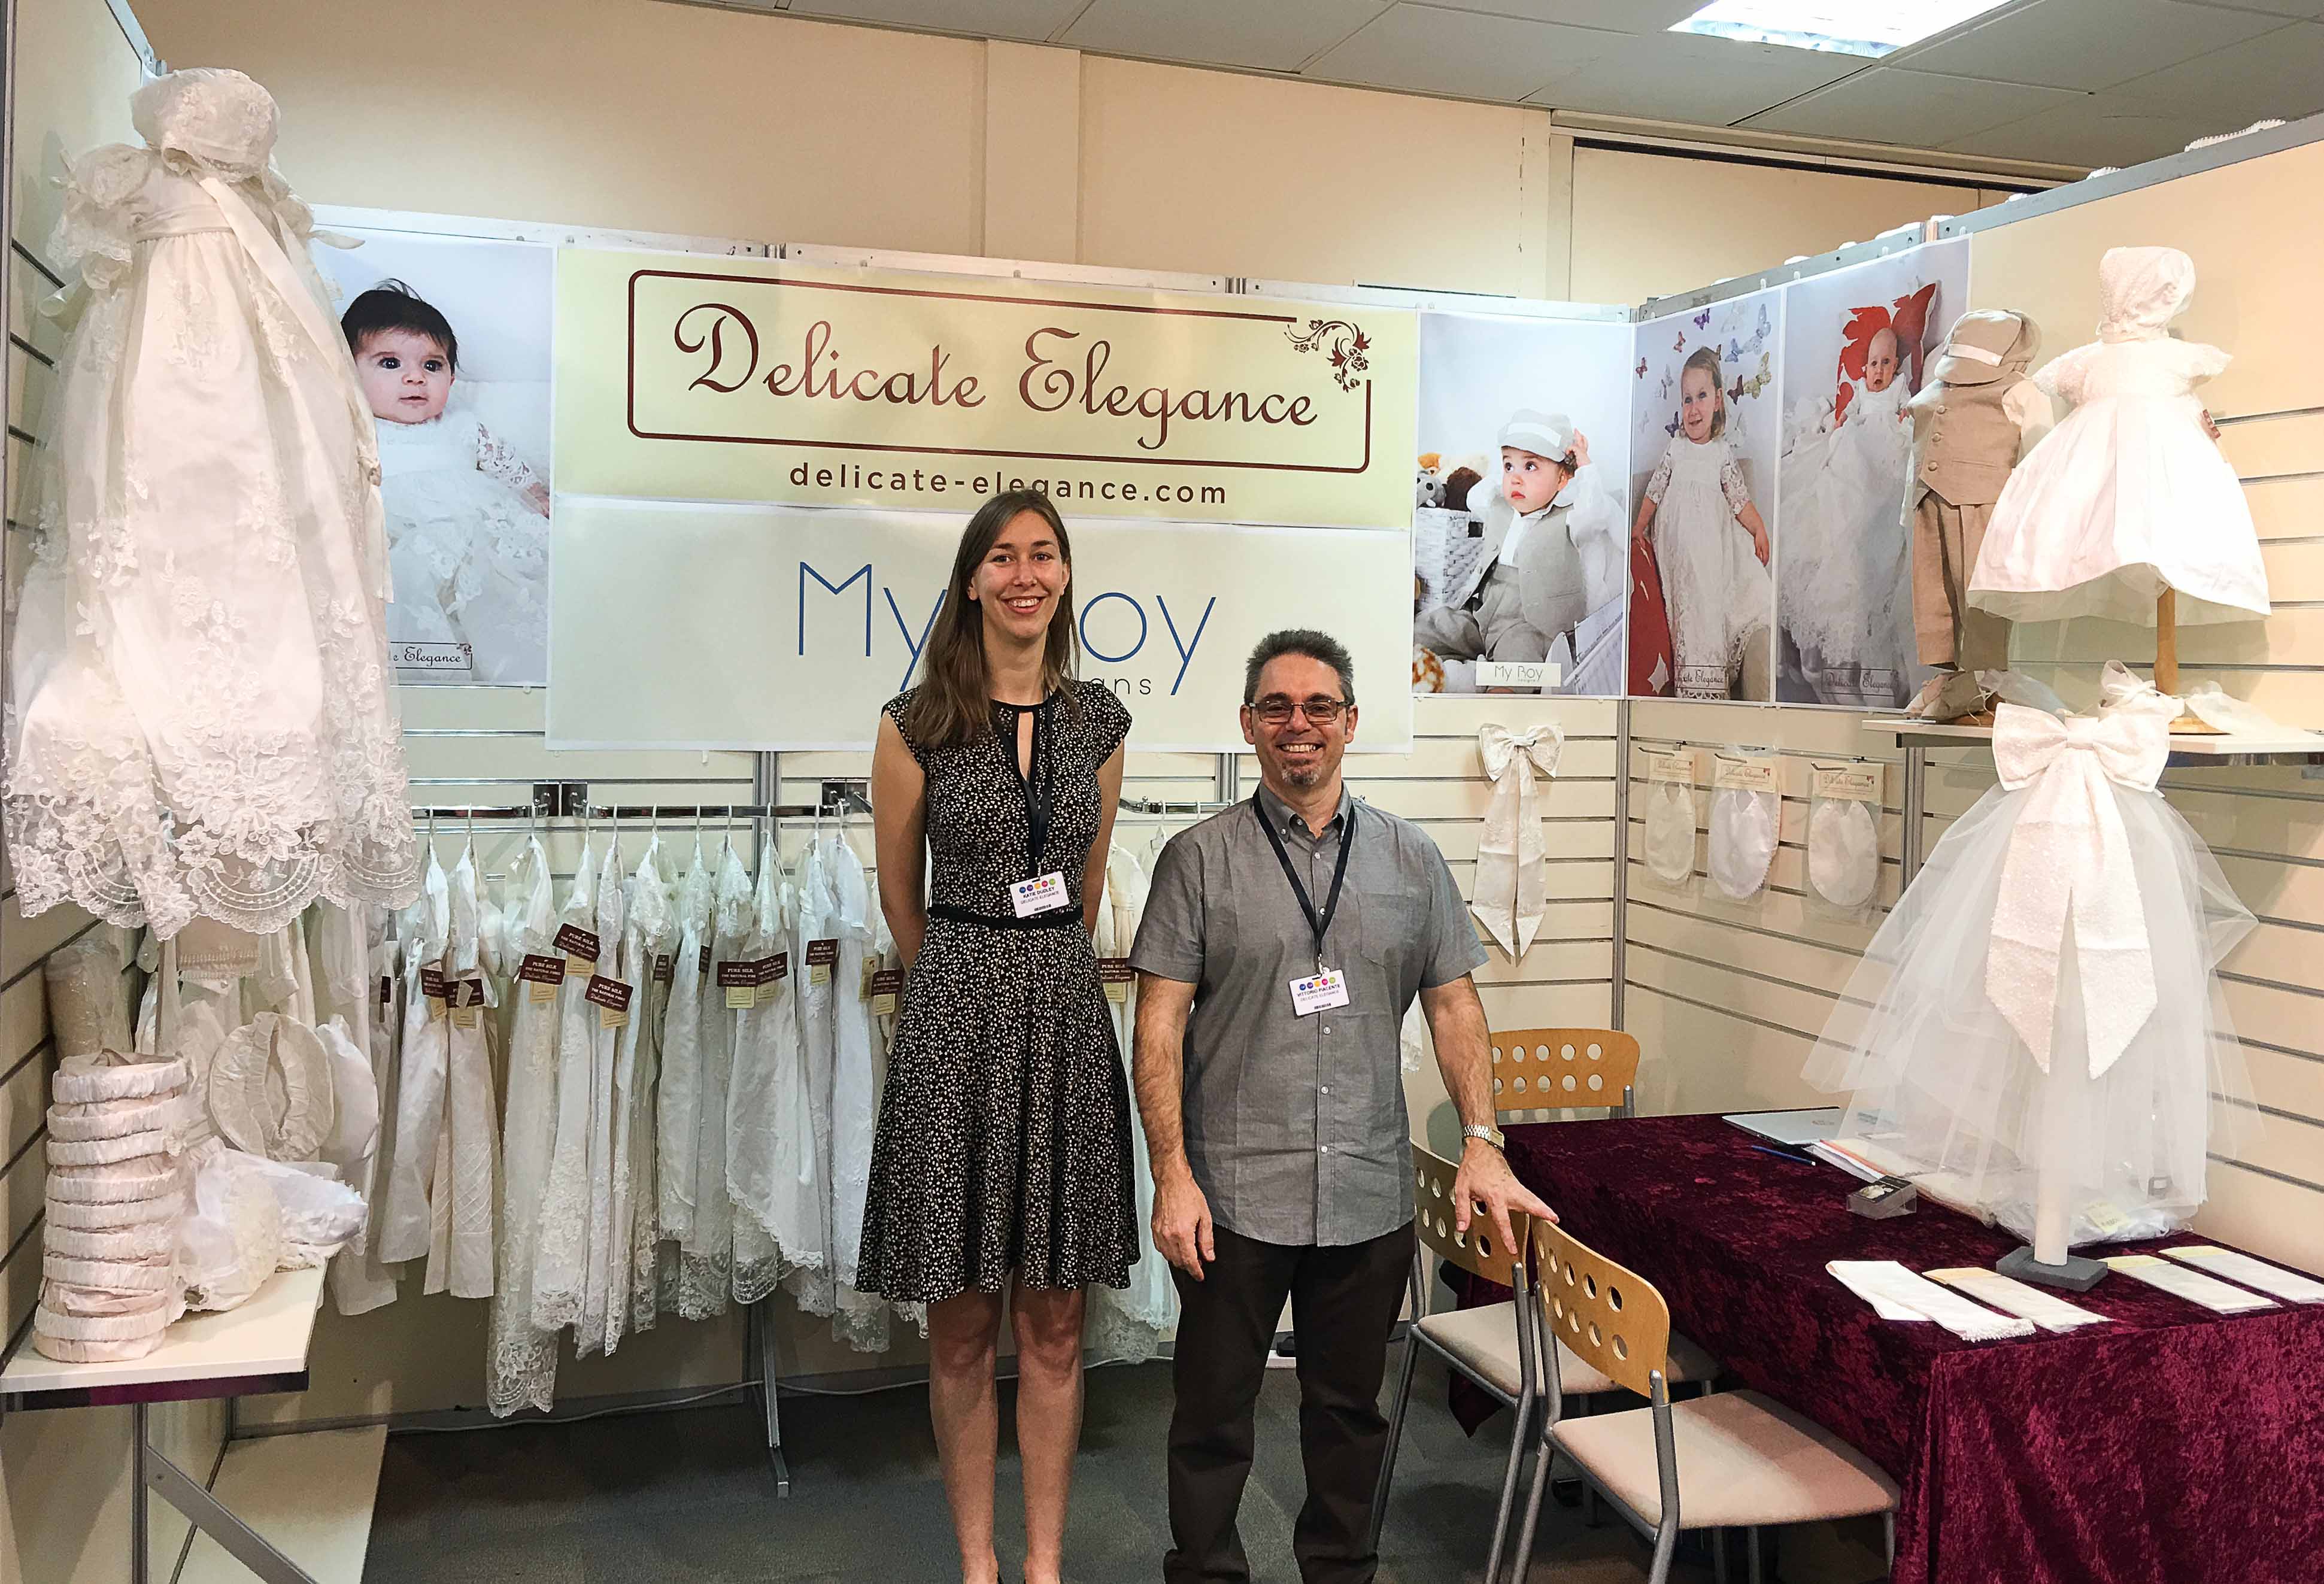 Delicate Elegance exhibiting at INDx Kidswear trade show in Solihull, UK in July 2016